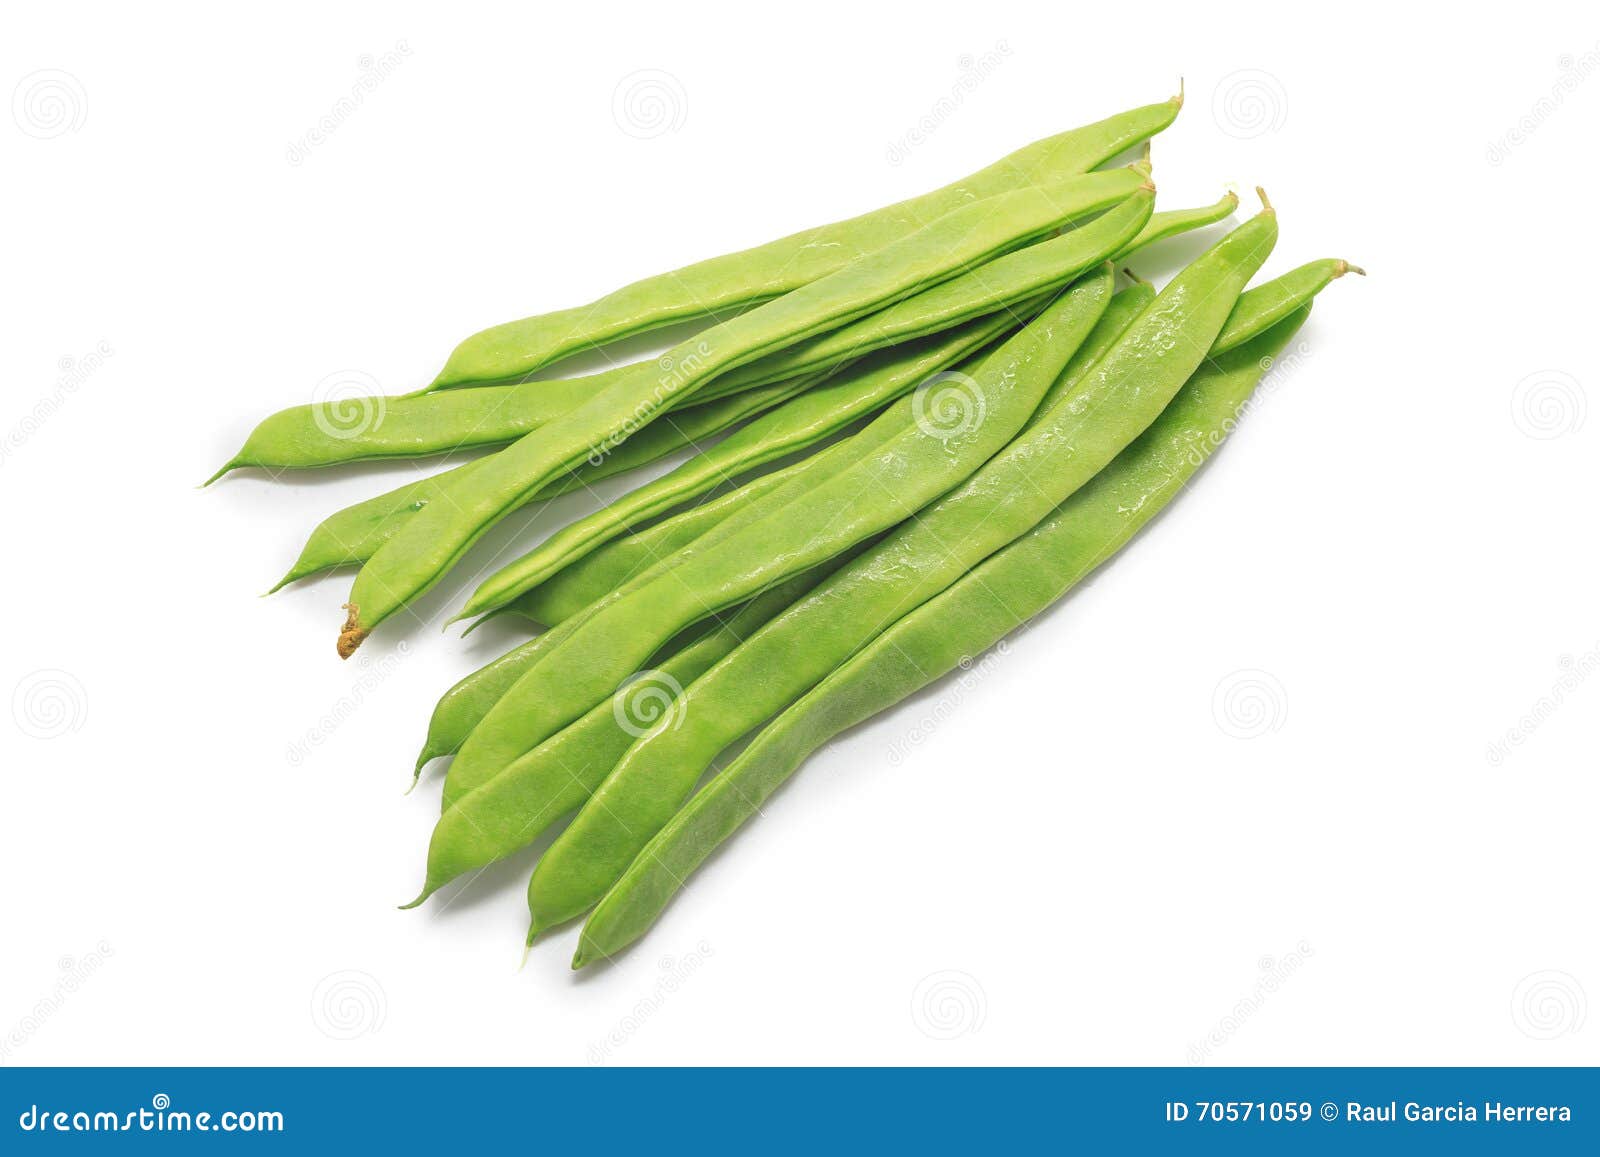 green beans handful  on white background